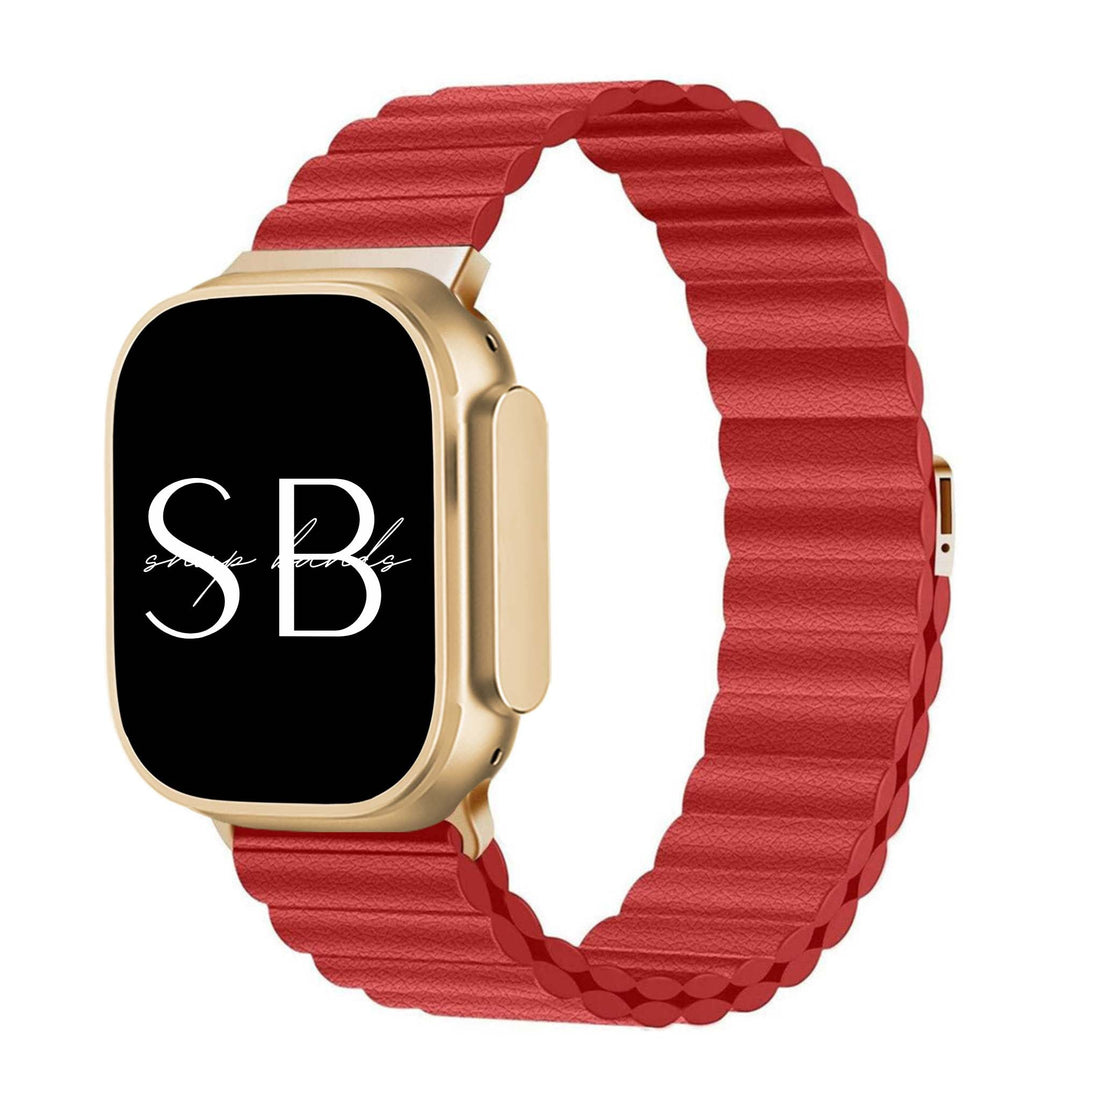 ROSSO GENUINE LEATHER BAND - #Snap Bands#